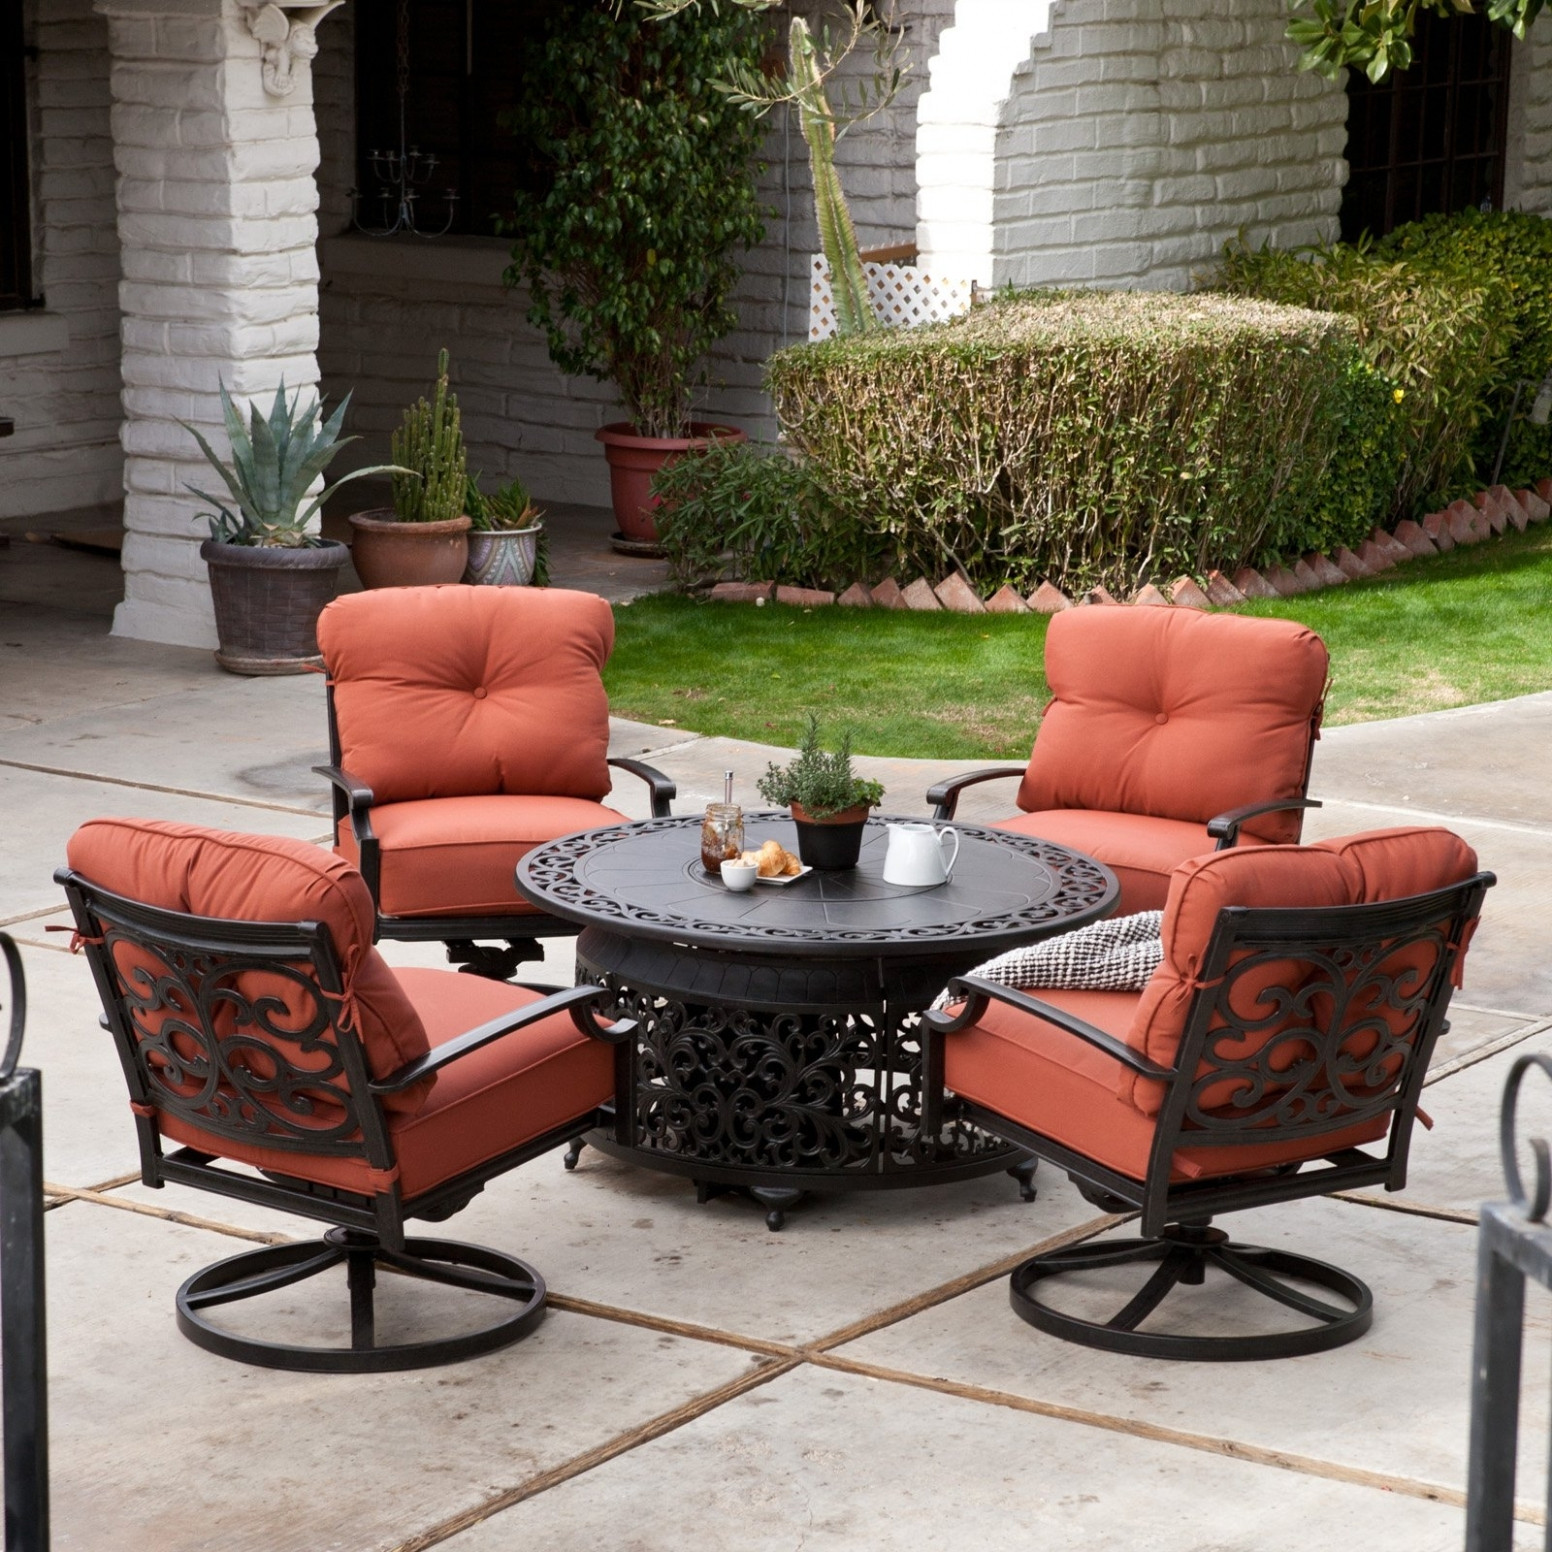 Patio Sets With Fire Pit
 25 Inspirations of Fire Pit Patio Furniture Sets